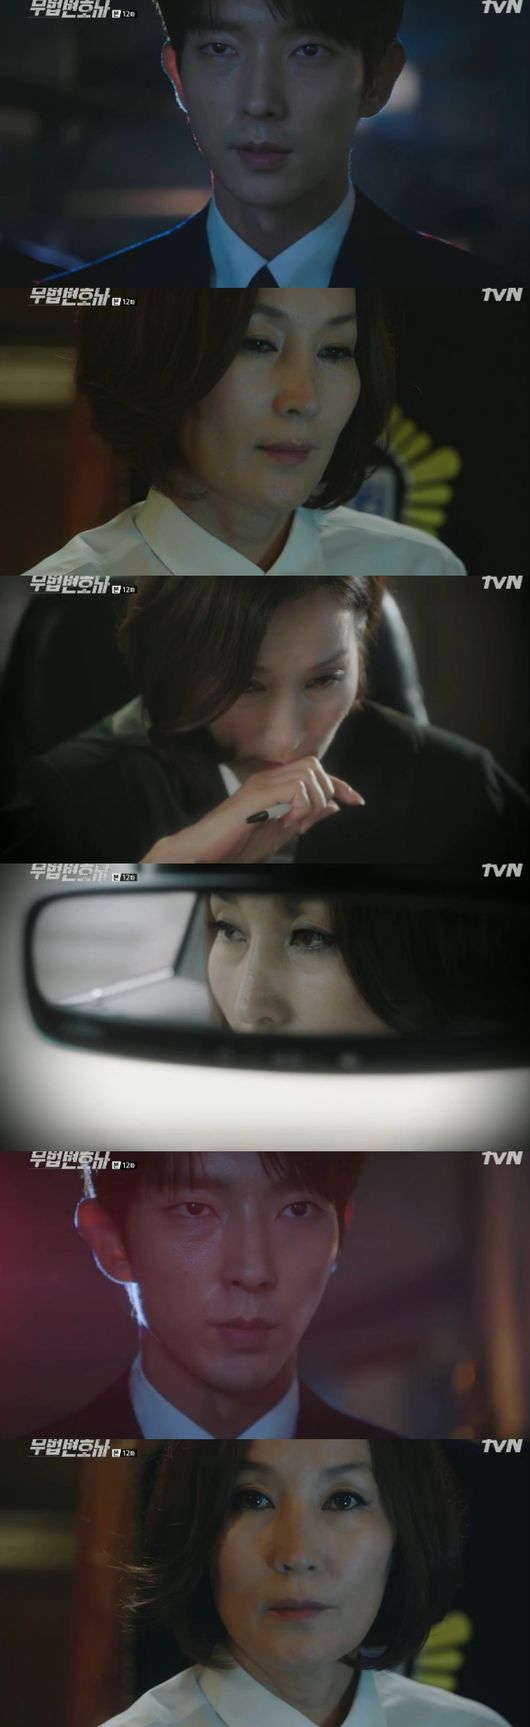 In The Outlaw Attorney, Lee Joon-gi found out that Lee Hye-Yeong had attracted him.In the TVN weekend drama Unlawful Lawyer (director Kim Jin-min, playwright Yoon Hyun-ho) broadcast on the 17th, I learned that the owner who sent the note by Lee Joon-gi was Cha Moon-sook (Lee Hye-Yeong).Sang-pil said that Hyun-joos words, which asked him to let him go, did not leave his head. Sang-pil said he would go to Hyun-joo and keep his words to break up with Jae-yi.Then, he said to Hyun-joo, Ill give you one thing. All the information about Cha Moon-sook and An-oh-joo was written.Hyunju sent it, but Hyunju was embarrassed that I did not send it, and Sangpil was also shocked by the situation where his expectation was missed.I was confused by the situation where I could not know who sent it.Soon, Sang-pil began to check it, thinking about where he was going to pick up. I will do it the way I used to.I will do the same as my uncle was hit, he said, marking the start of revenge for Seokgwan-dong (invited by Dae-hoon).He kidnapped Seokgwan-dong and asked Choi For Heroes what he did to Choi, saying, I will pay back what I did to my uncle.Seokgwan-dong said, I stabbed you with a knife, but I did not do it, but I did not do it. What you did today will do the same.Seokgwan-dong said, Everyone has told me to do it. He said, I want revenge on An-oh. Sang-pil said, An-oh will revenge you for me.Phil came to An-o-ju, and he looked at An-o-ju and Nam Soon-ja with interest, and Cha Moon-sook provoked them to know if they knew.I do not know if Seokgwan-dong is curious, he said. I will know through the news tomorrow morning.So, An-oh, who is hot, pointed a gun at the head of the pencil and warned, If you go around with your head, you will put a bullet in it.Sang-pil obtained the evidence from his cell phone that recorded all the words of An-oh-ju: to solve them first on the Internet for the note owner confirmation process, a matter to be dealt with before he put An-oh-ju in court.Sang-pil looked at the note carefully.Sang-pil visited Chun Seung-beom (Park Ho-san) and said, This is all my questions solved. He found out that the person who sent the note to him was none other than Cha Moon-sook.Cha Moon-sook brought himself in, and he was watching The Big Picture and telling the note to Sang-pil from the beginning.He found out that he had Lee Yong to remove the aquariums who knew Chibu.I tried to remove the Bong Sang Pil by Lee Yong, who made me come to the ready and tried to Lee Yong with my knife.Especially, Lee Yong was the revenge of the epitaph to remove the anoju.I knew the desire of a person and it was Lee Yong-suk, said Sang-pil. But I chose me even though I knew that the end of my revenge was myself.